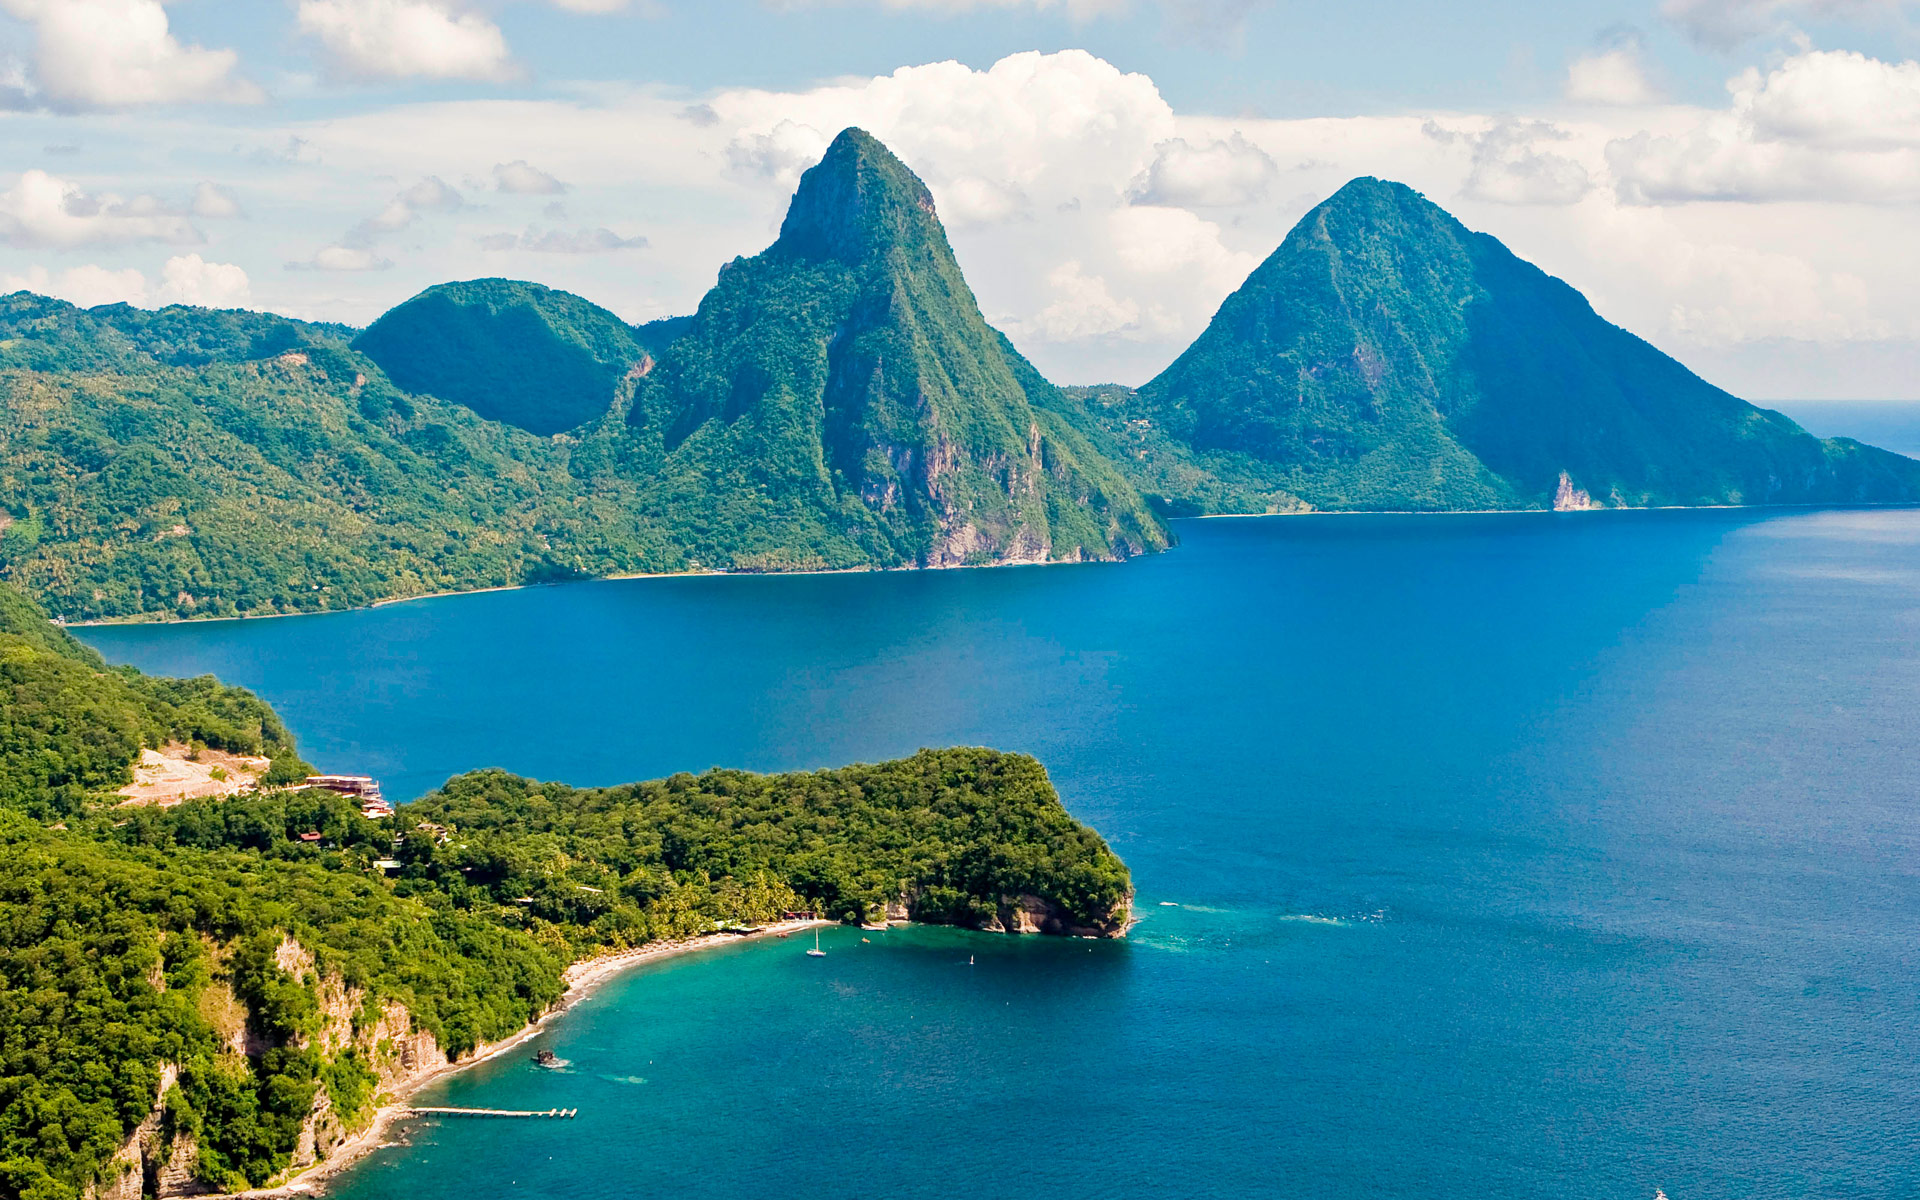 St Lucia-An Island For Honeymooners - All About Croatian Islands